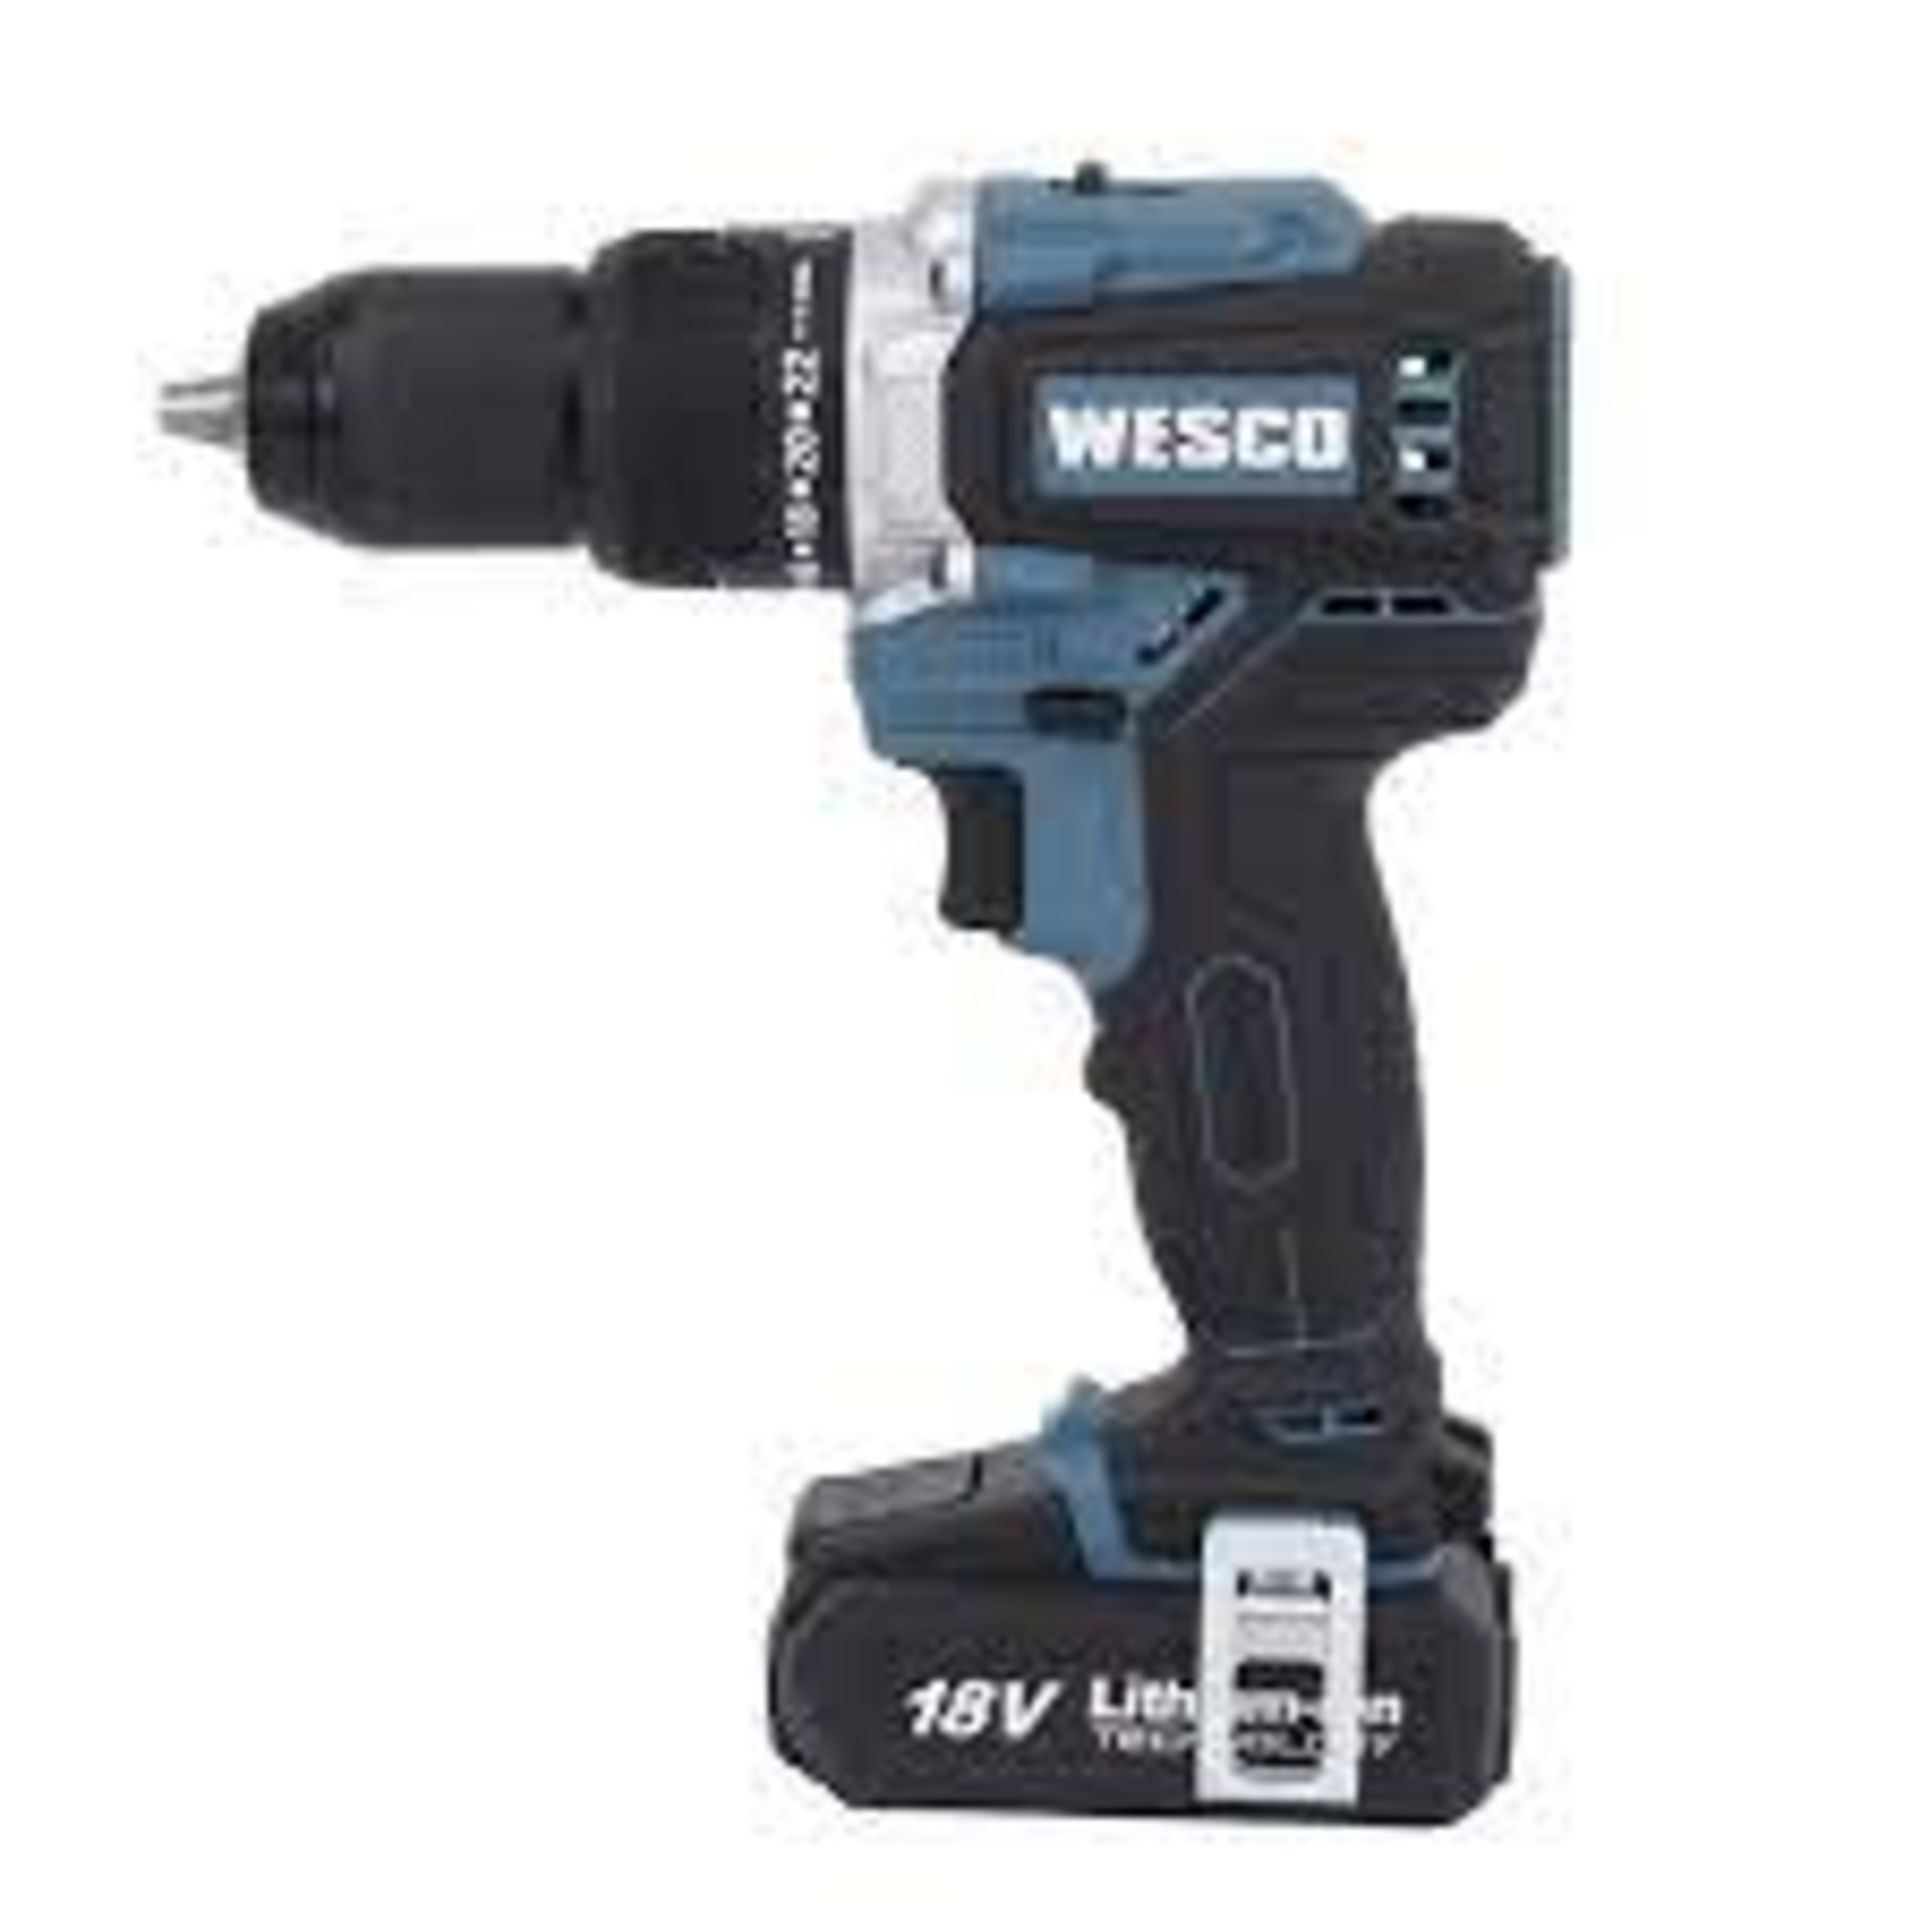 NEW BOXED WESCO Brushless Cordless Drill, WESCO 18V 2.0Ah Cordless Combi Drill with 13